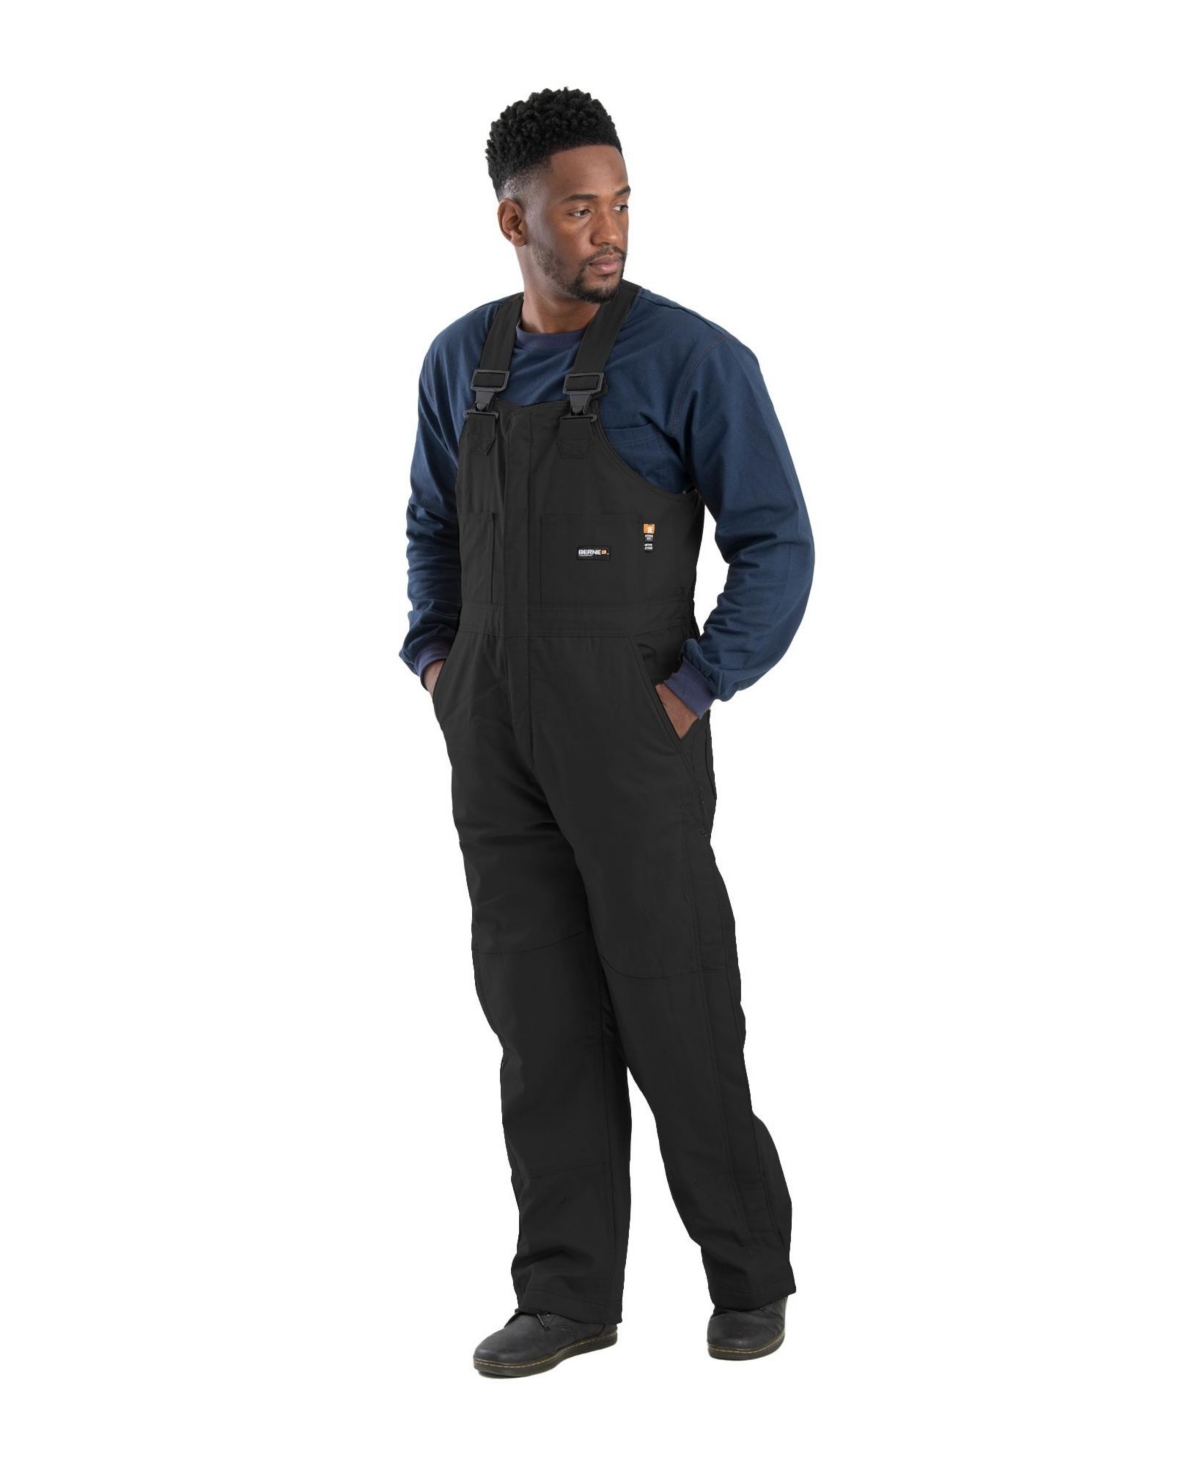 Men's Flame Resistant Duck Insulated Bib Overall - Black